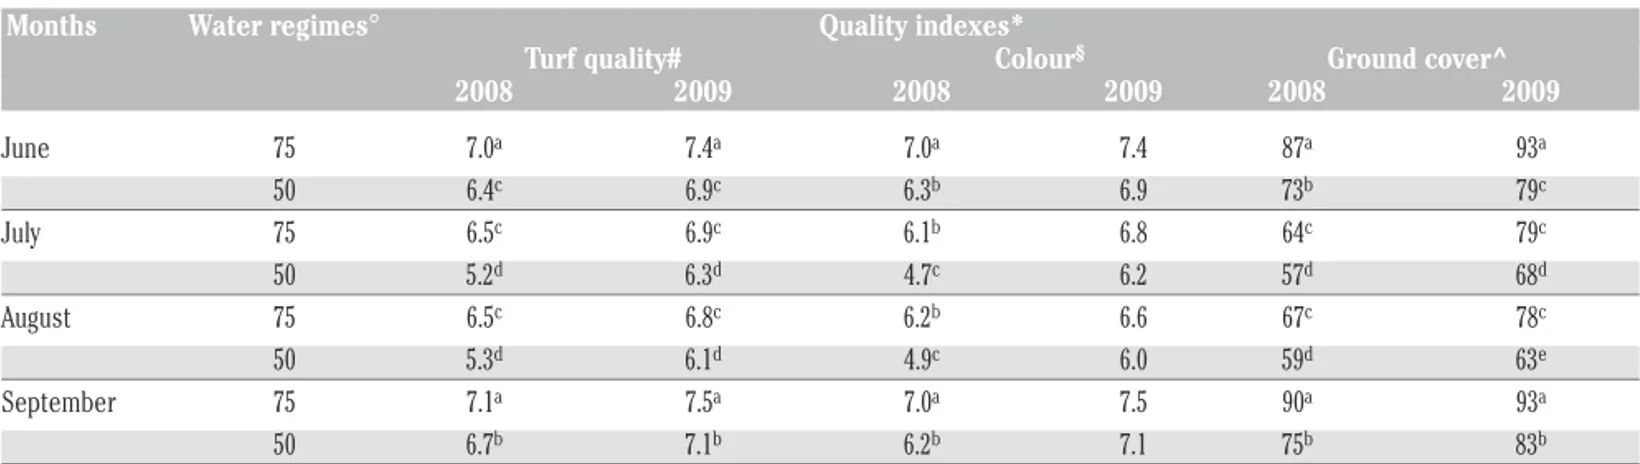 Table 6. Effect of species on turf quality, ground cover and colour index in 2008 and 2009.